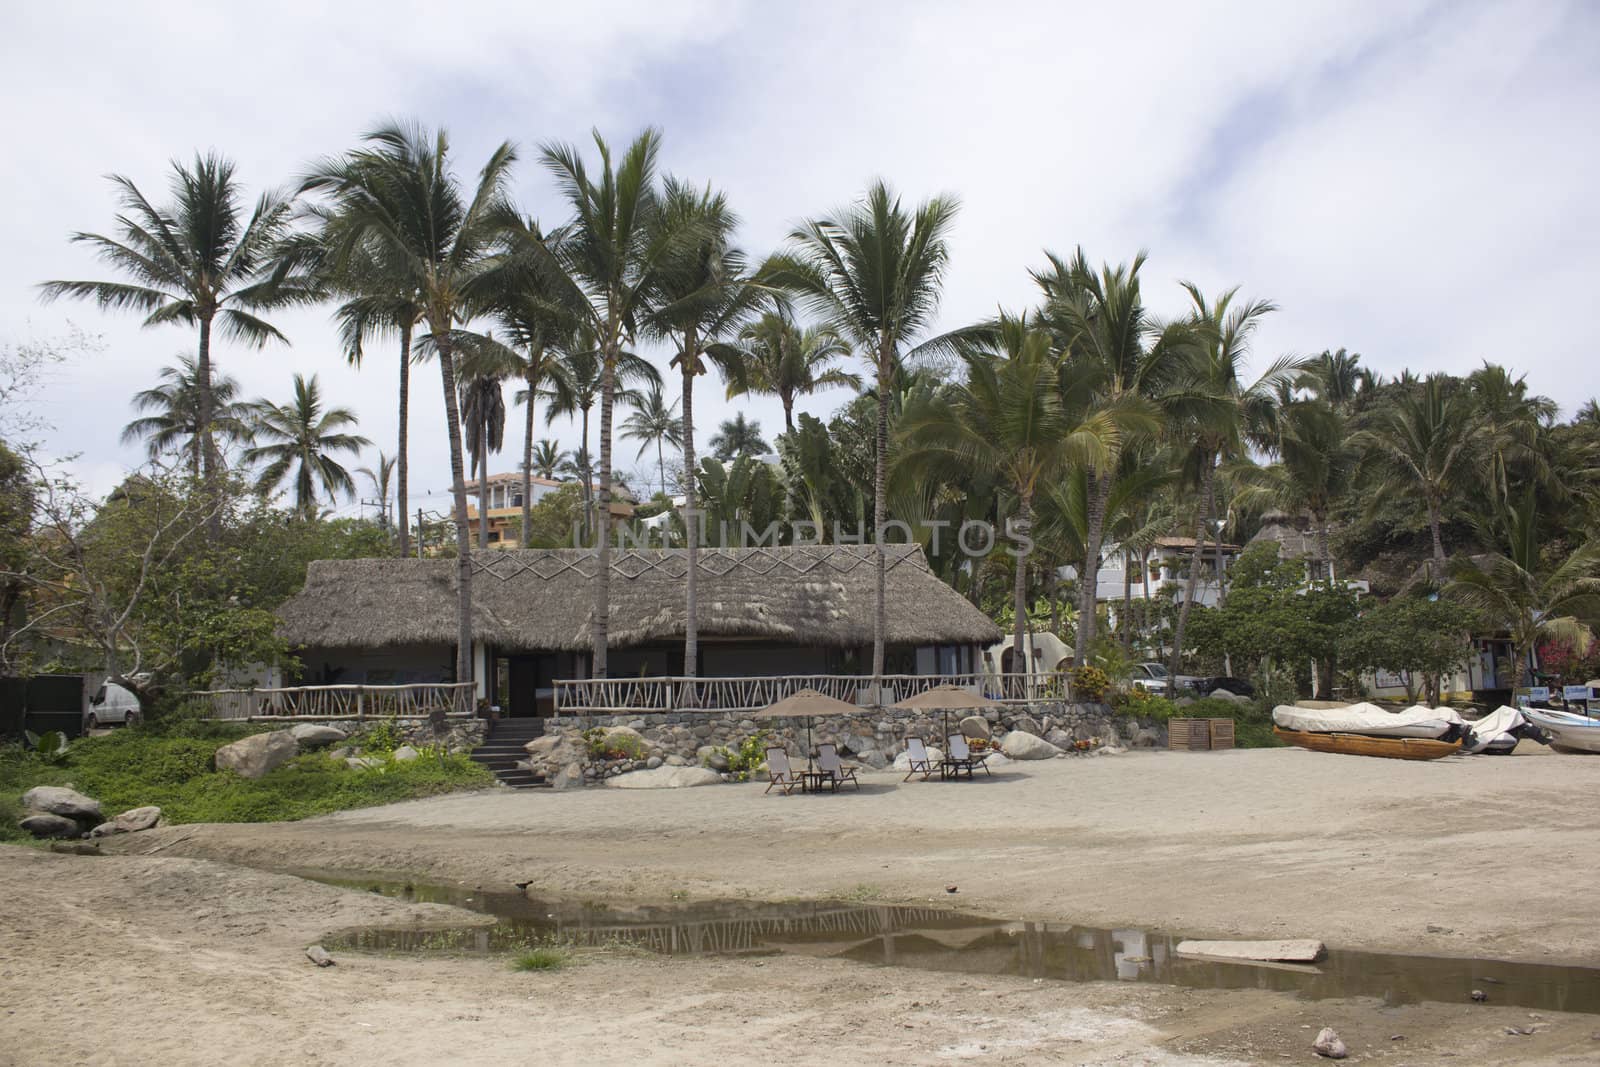 a tropical beach location in mexico with palm trees.